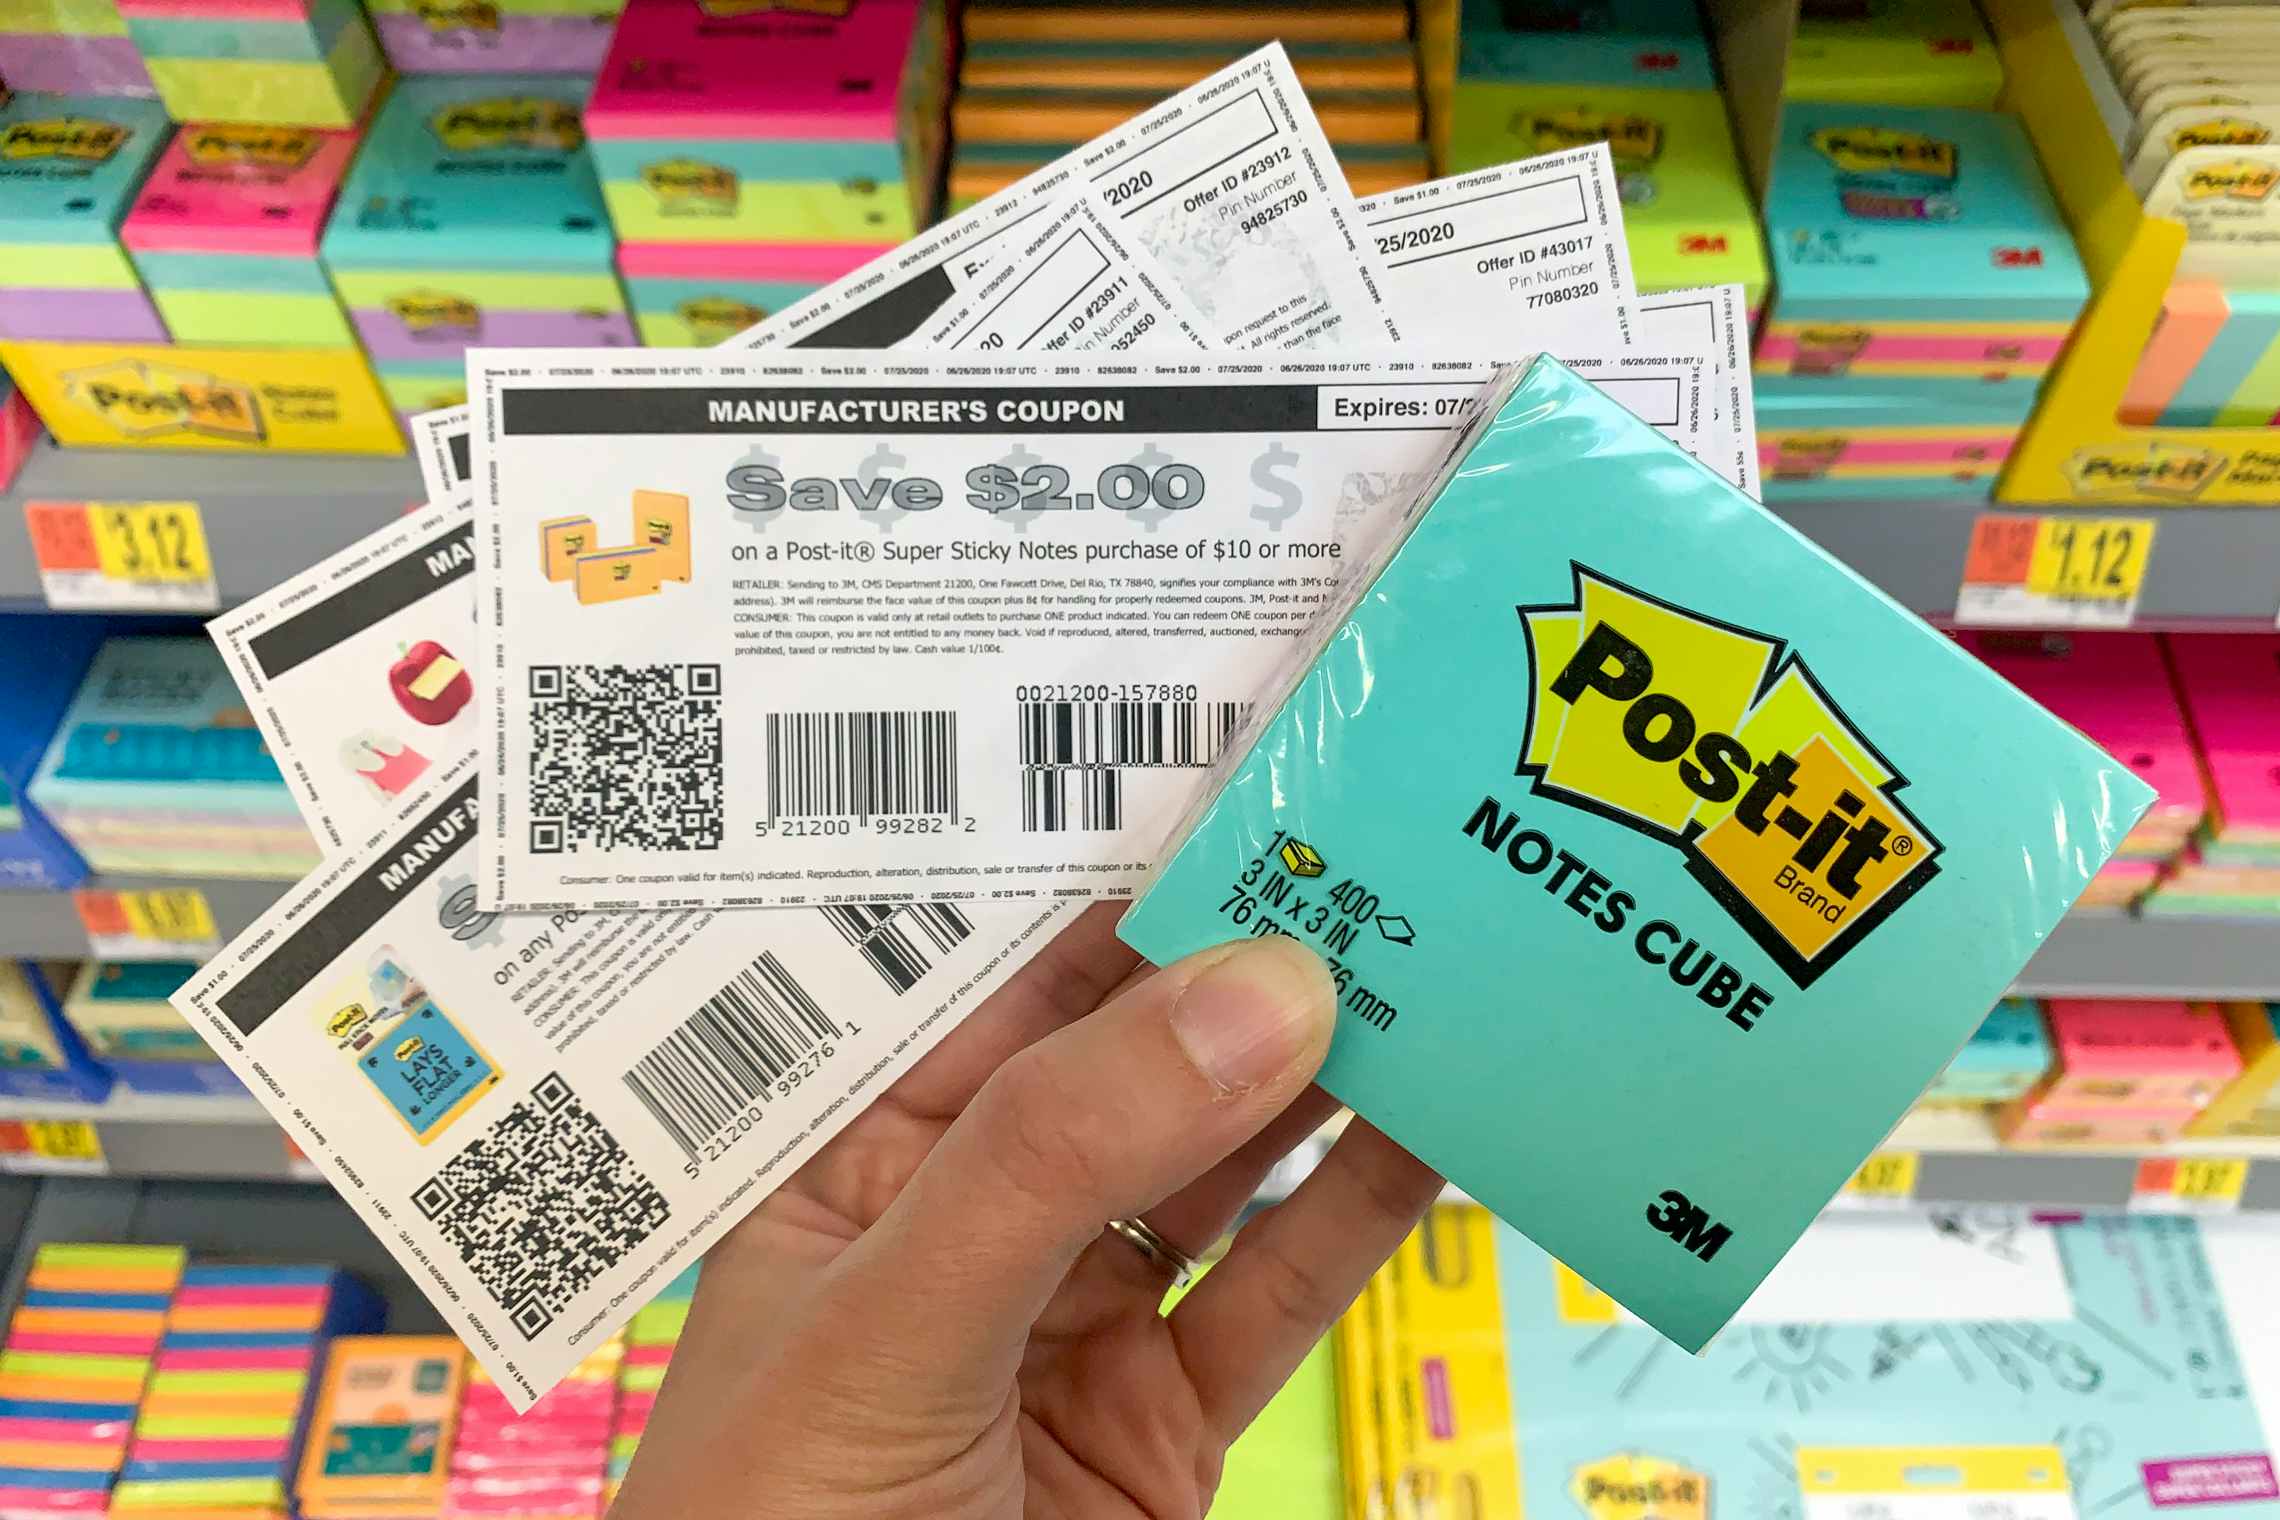 A pack of post-its held along with coupons